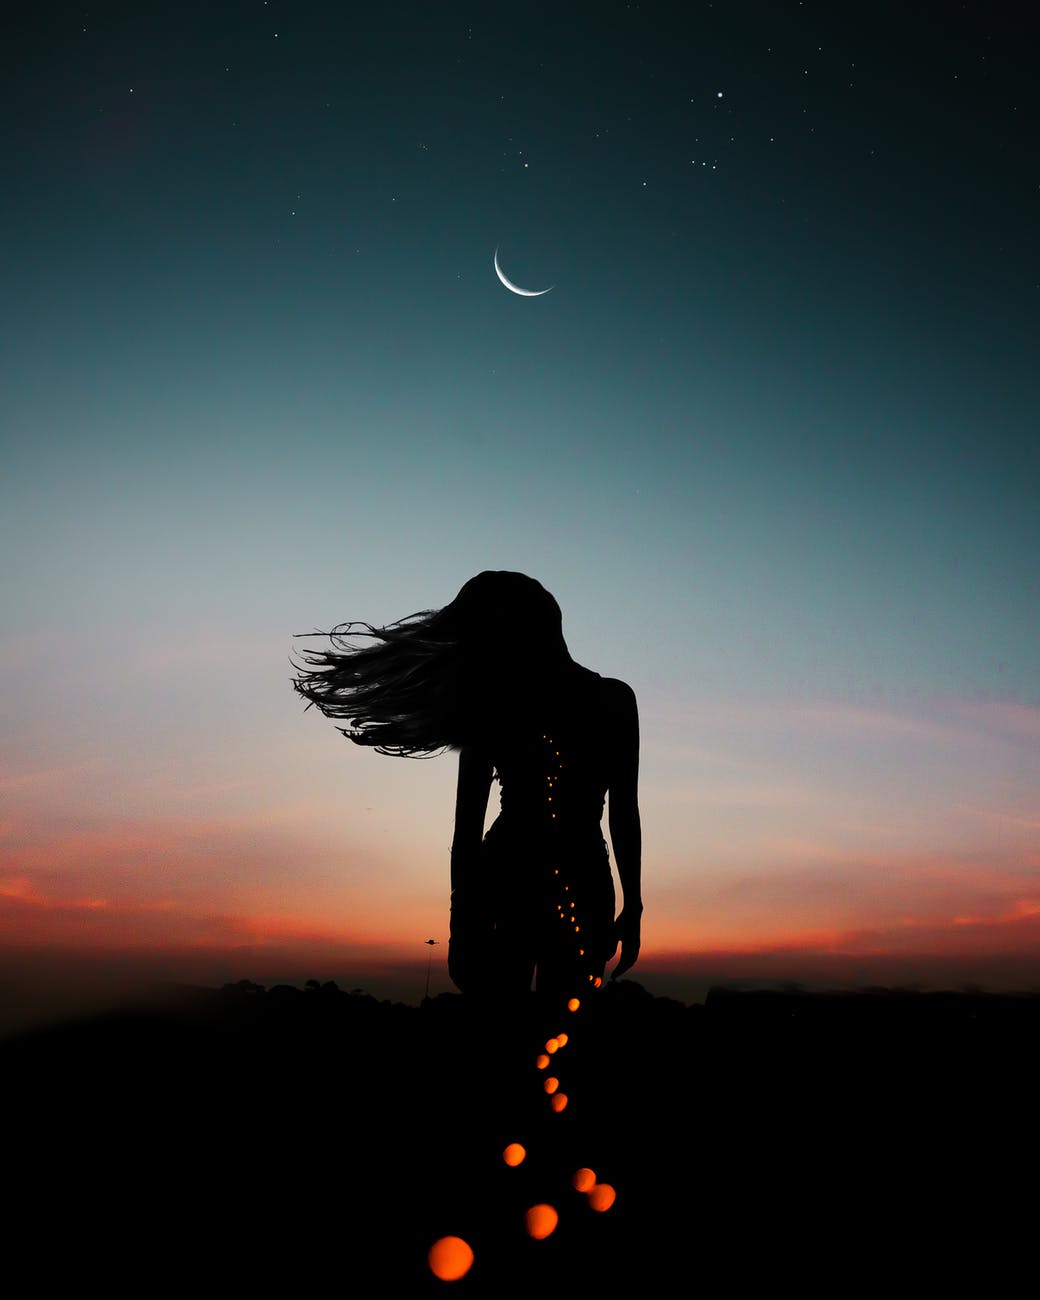 silhouette of person under crescent moon